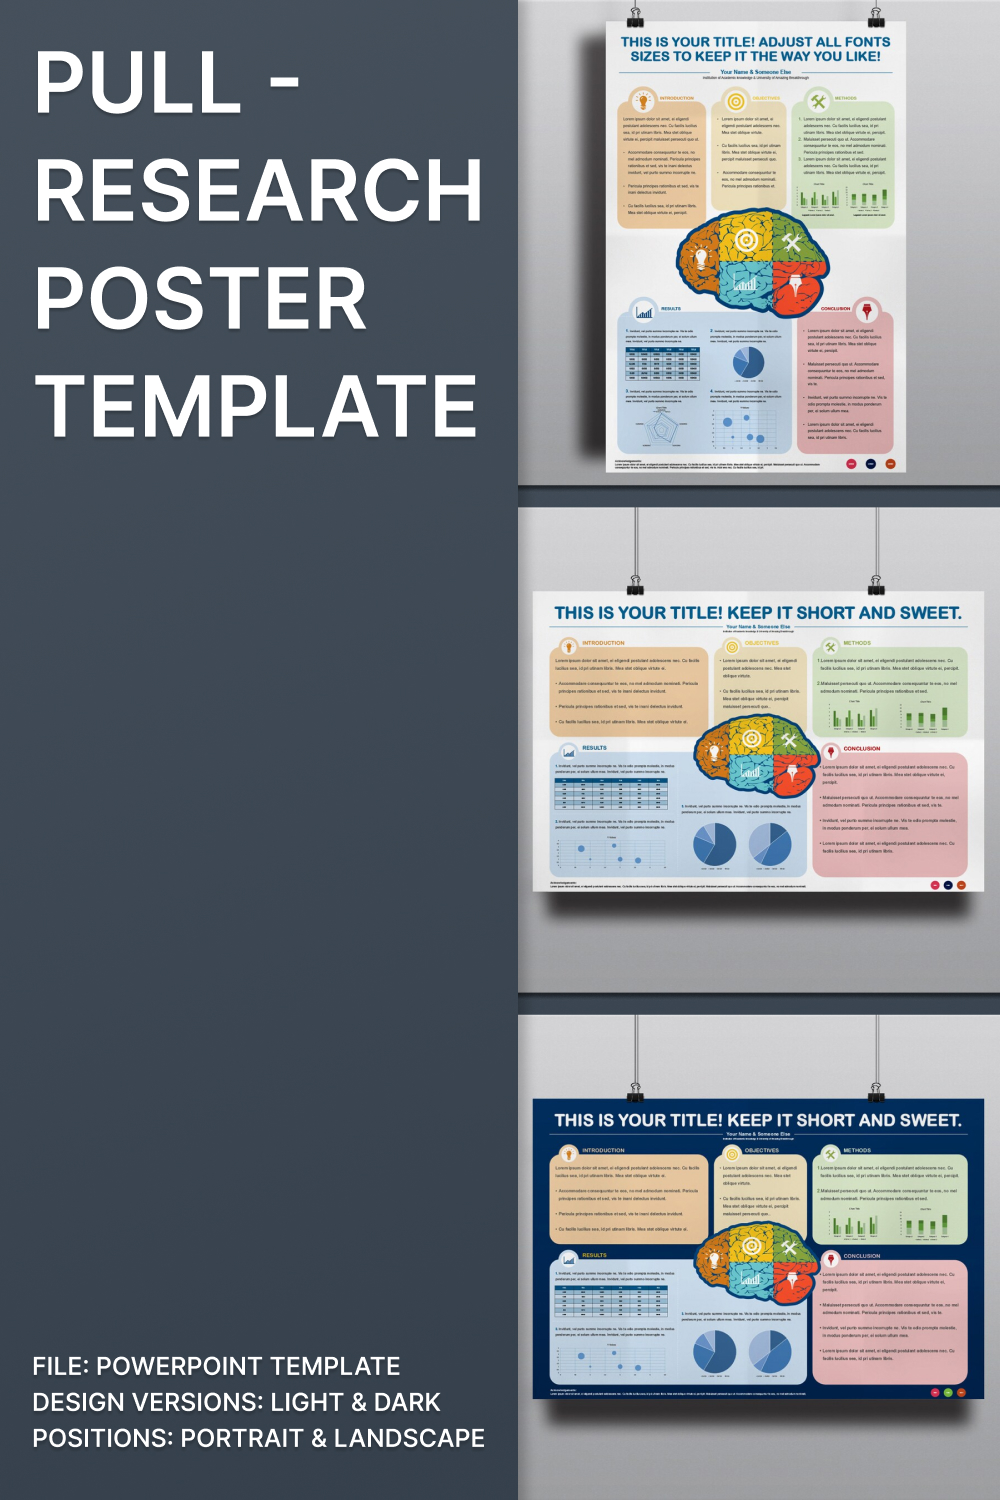 Pinterest images pull research poster template.